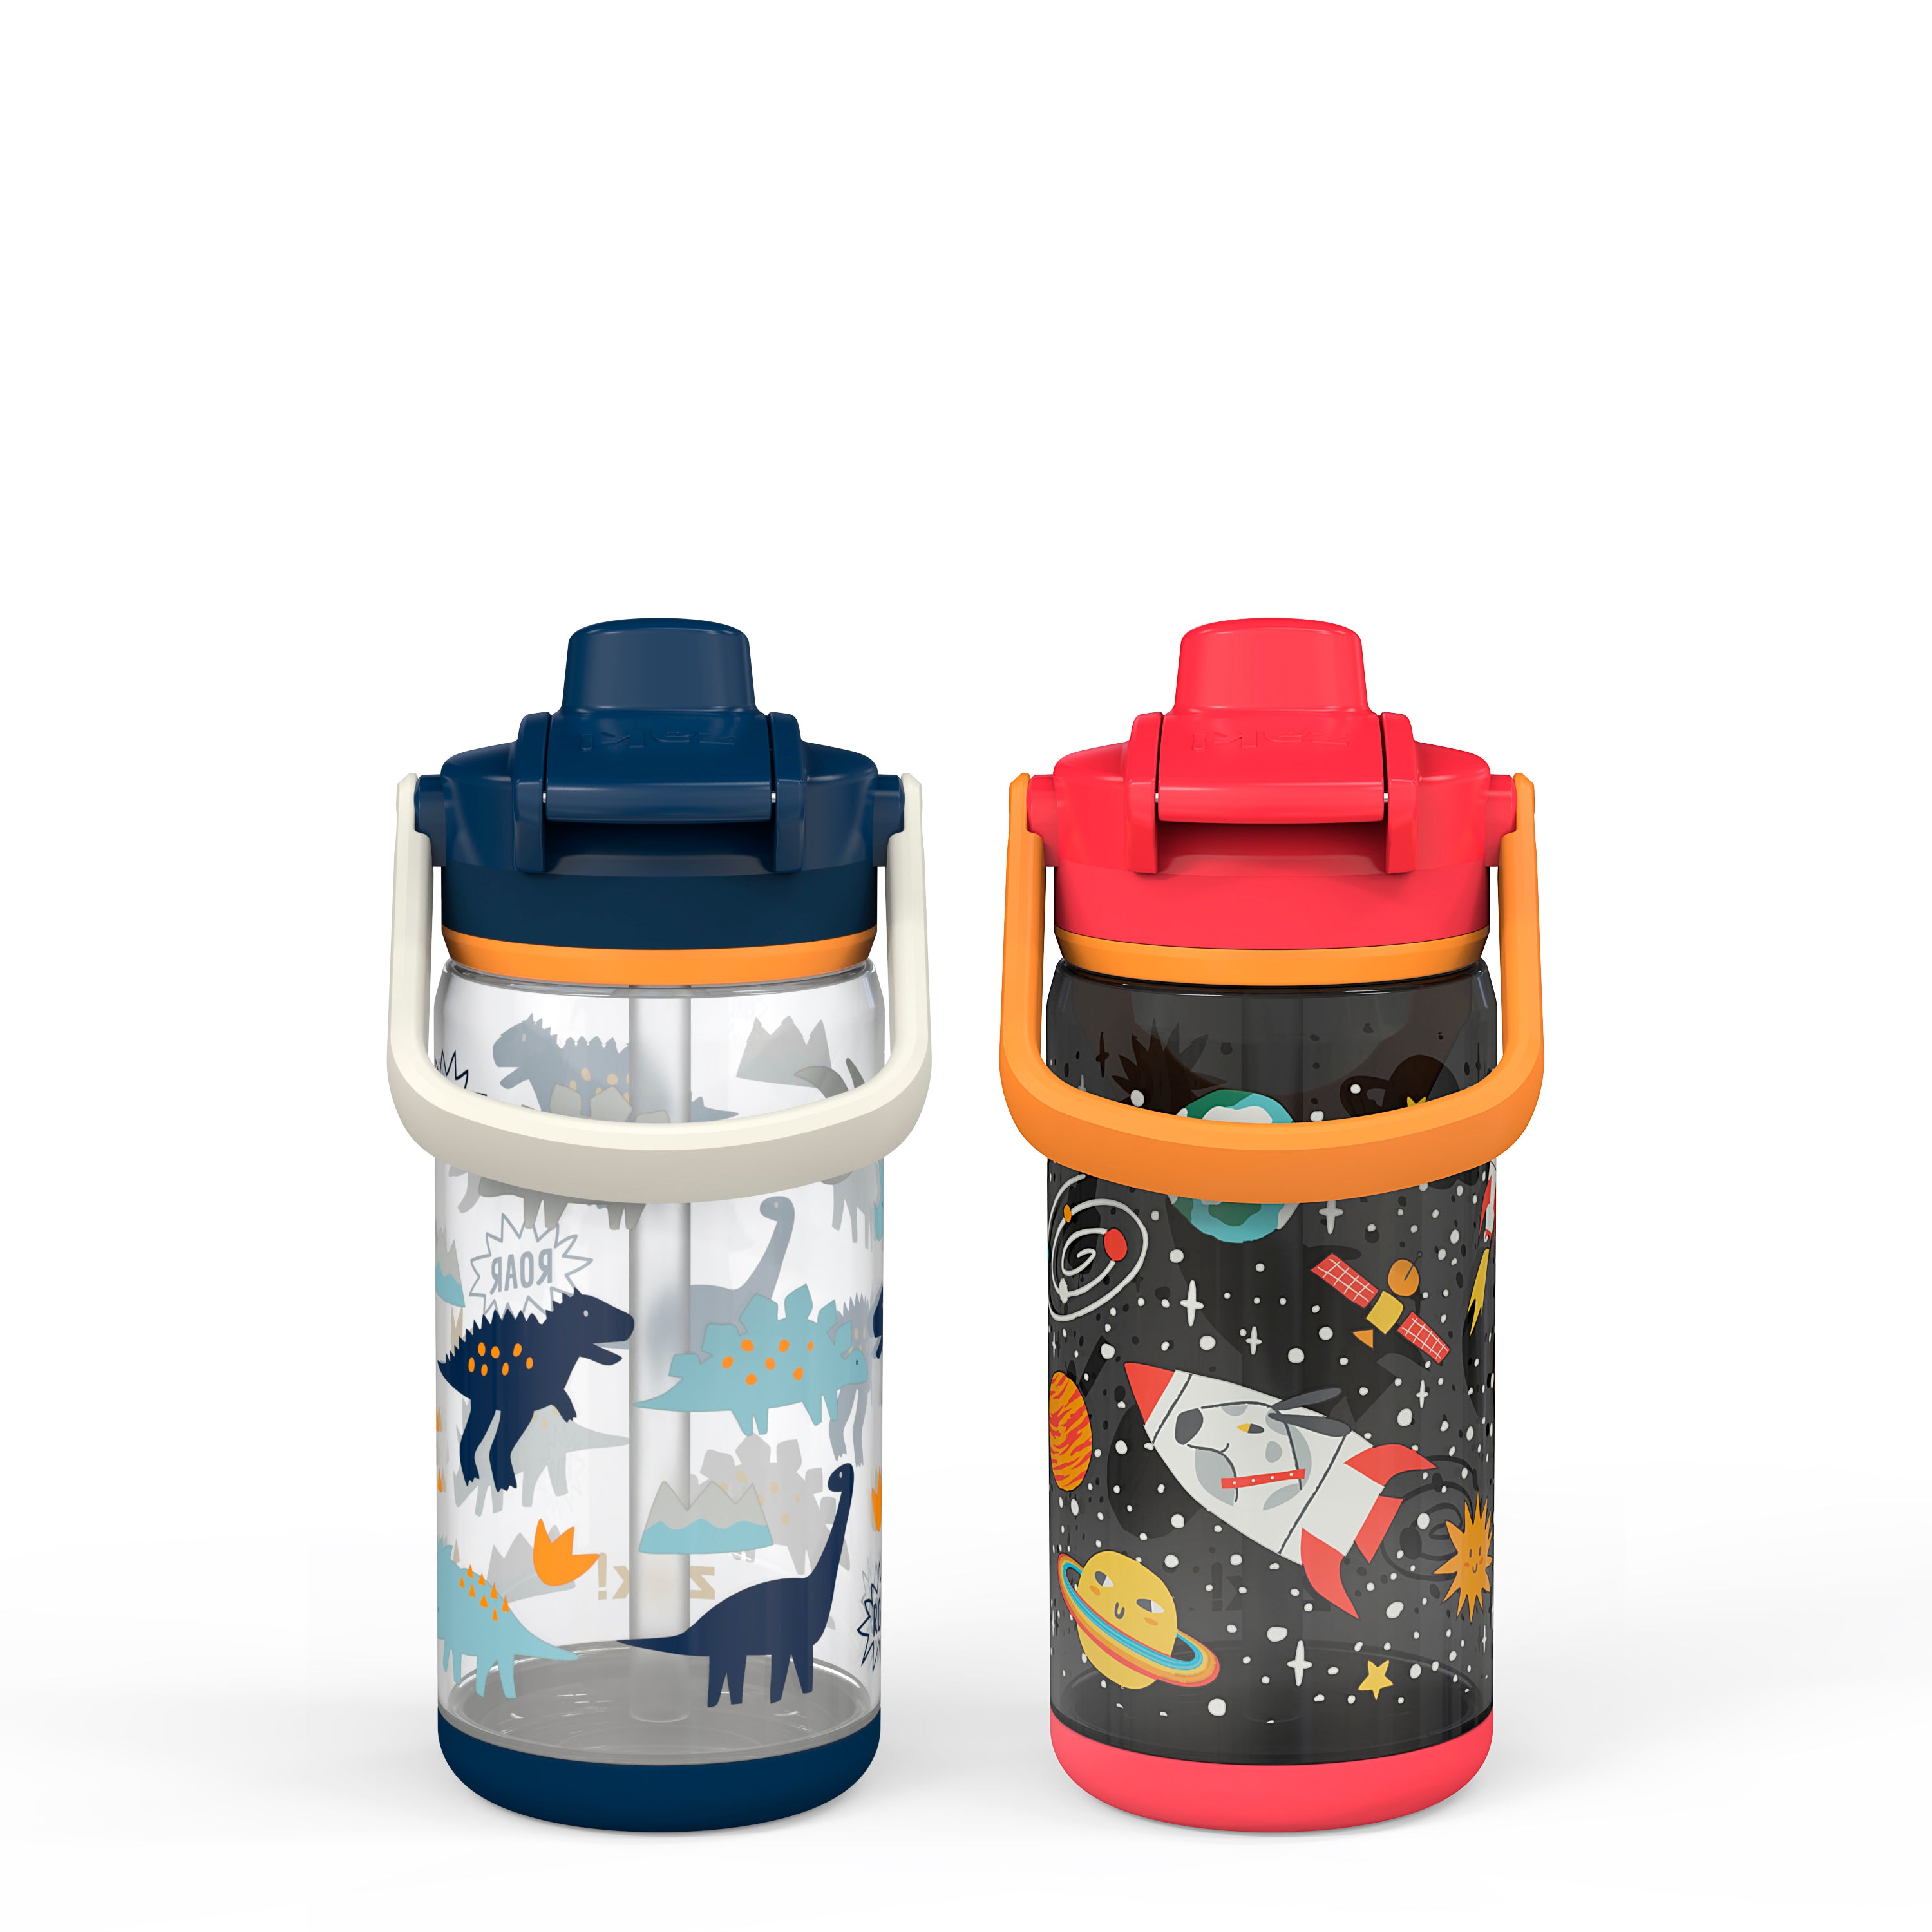 Beacon 2-Piece Kids Water Bottle Set with Covered Spout - Spaceships and Zaksaurus, 16 Ounces